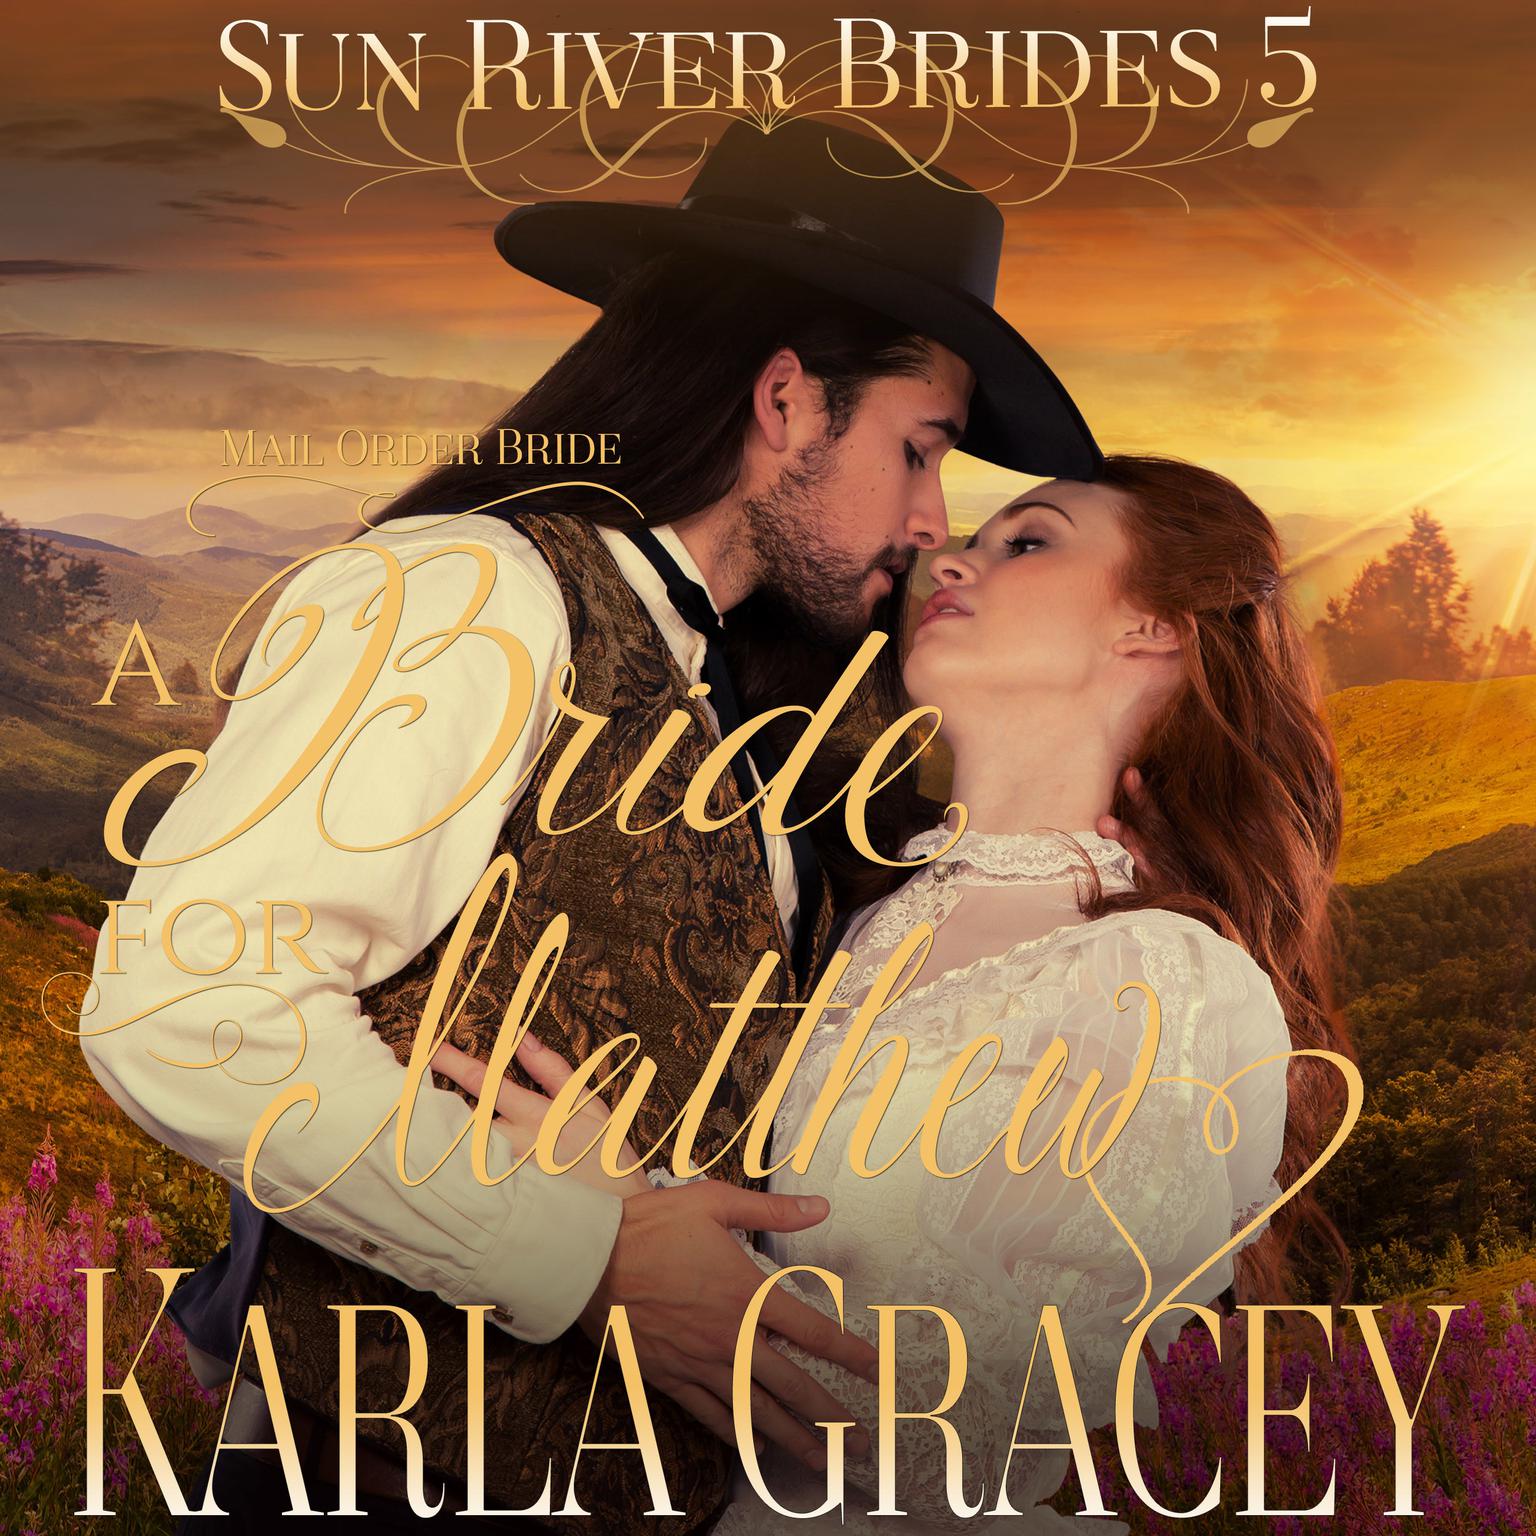 Mail Order Bride - A Bride for Matthew (Sun River Brides, Book 5) Audiobook, by Karla Gracey